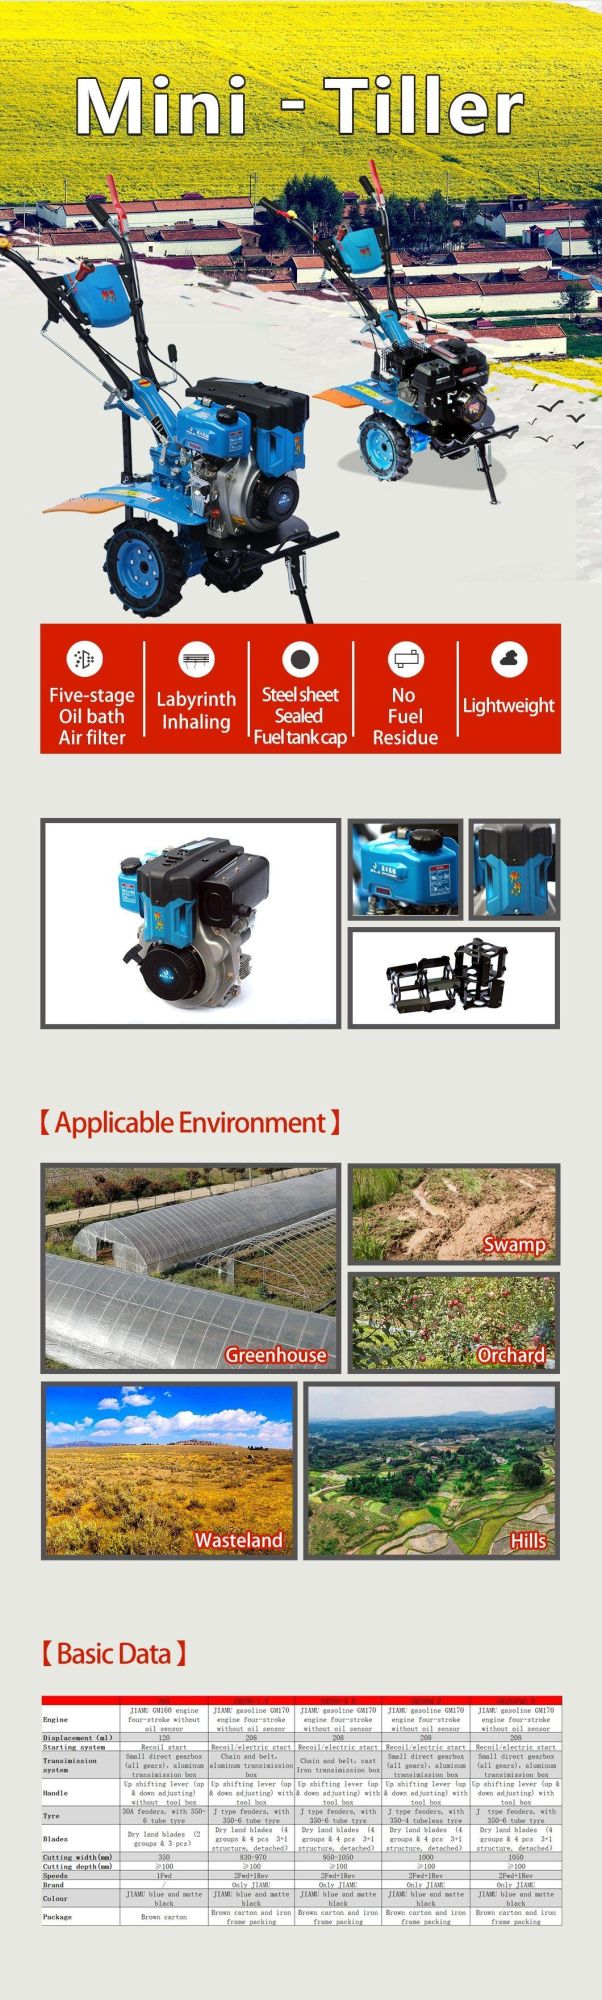 Jiamu GM500-1 D with GM170 All Gear Aluminum transmission Box Agricultural Machinery Petrol D-Style Mini Tiller for Sale